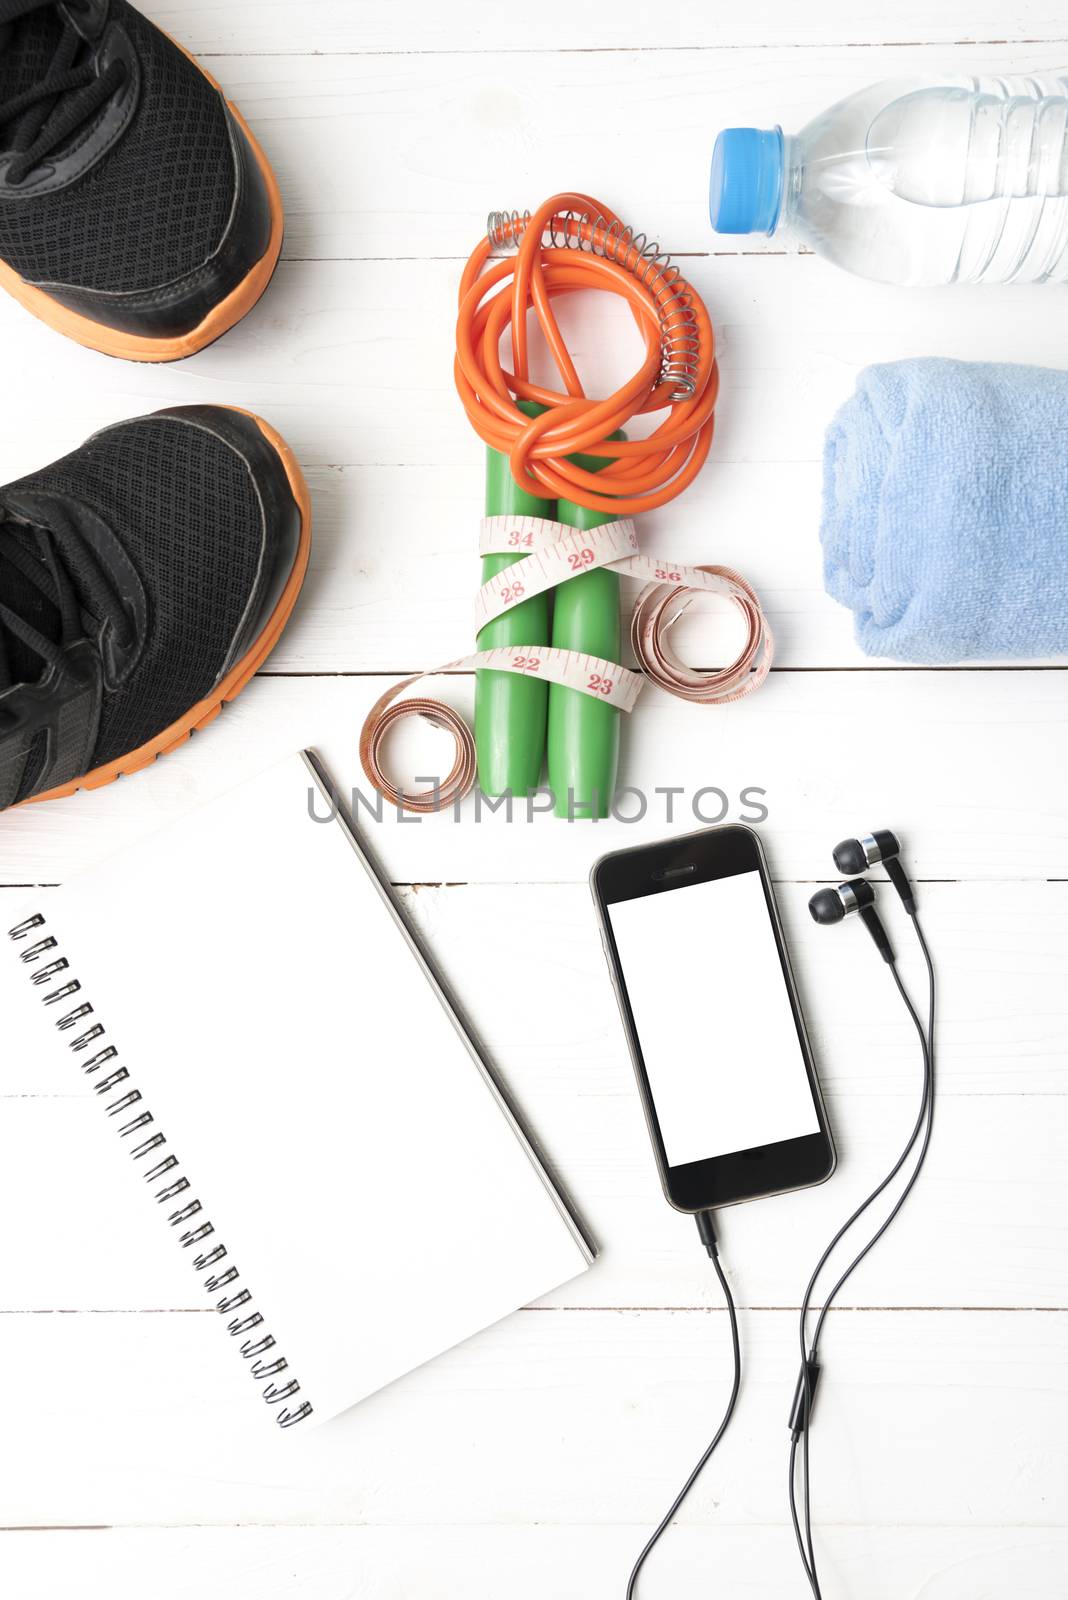 fitness equipment : running shoes,towel,jumping rope,water bottle,phone,notepad and measuring tape on white wood table